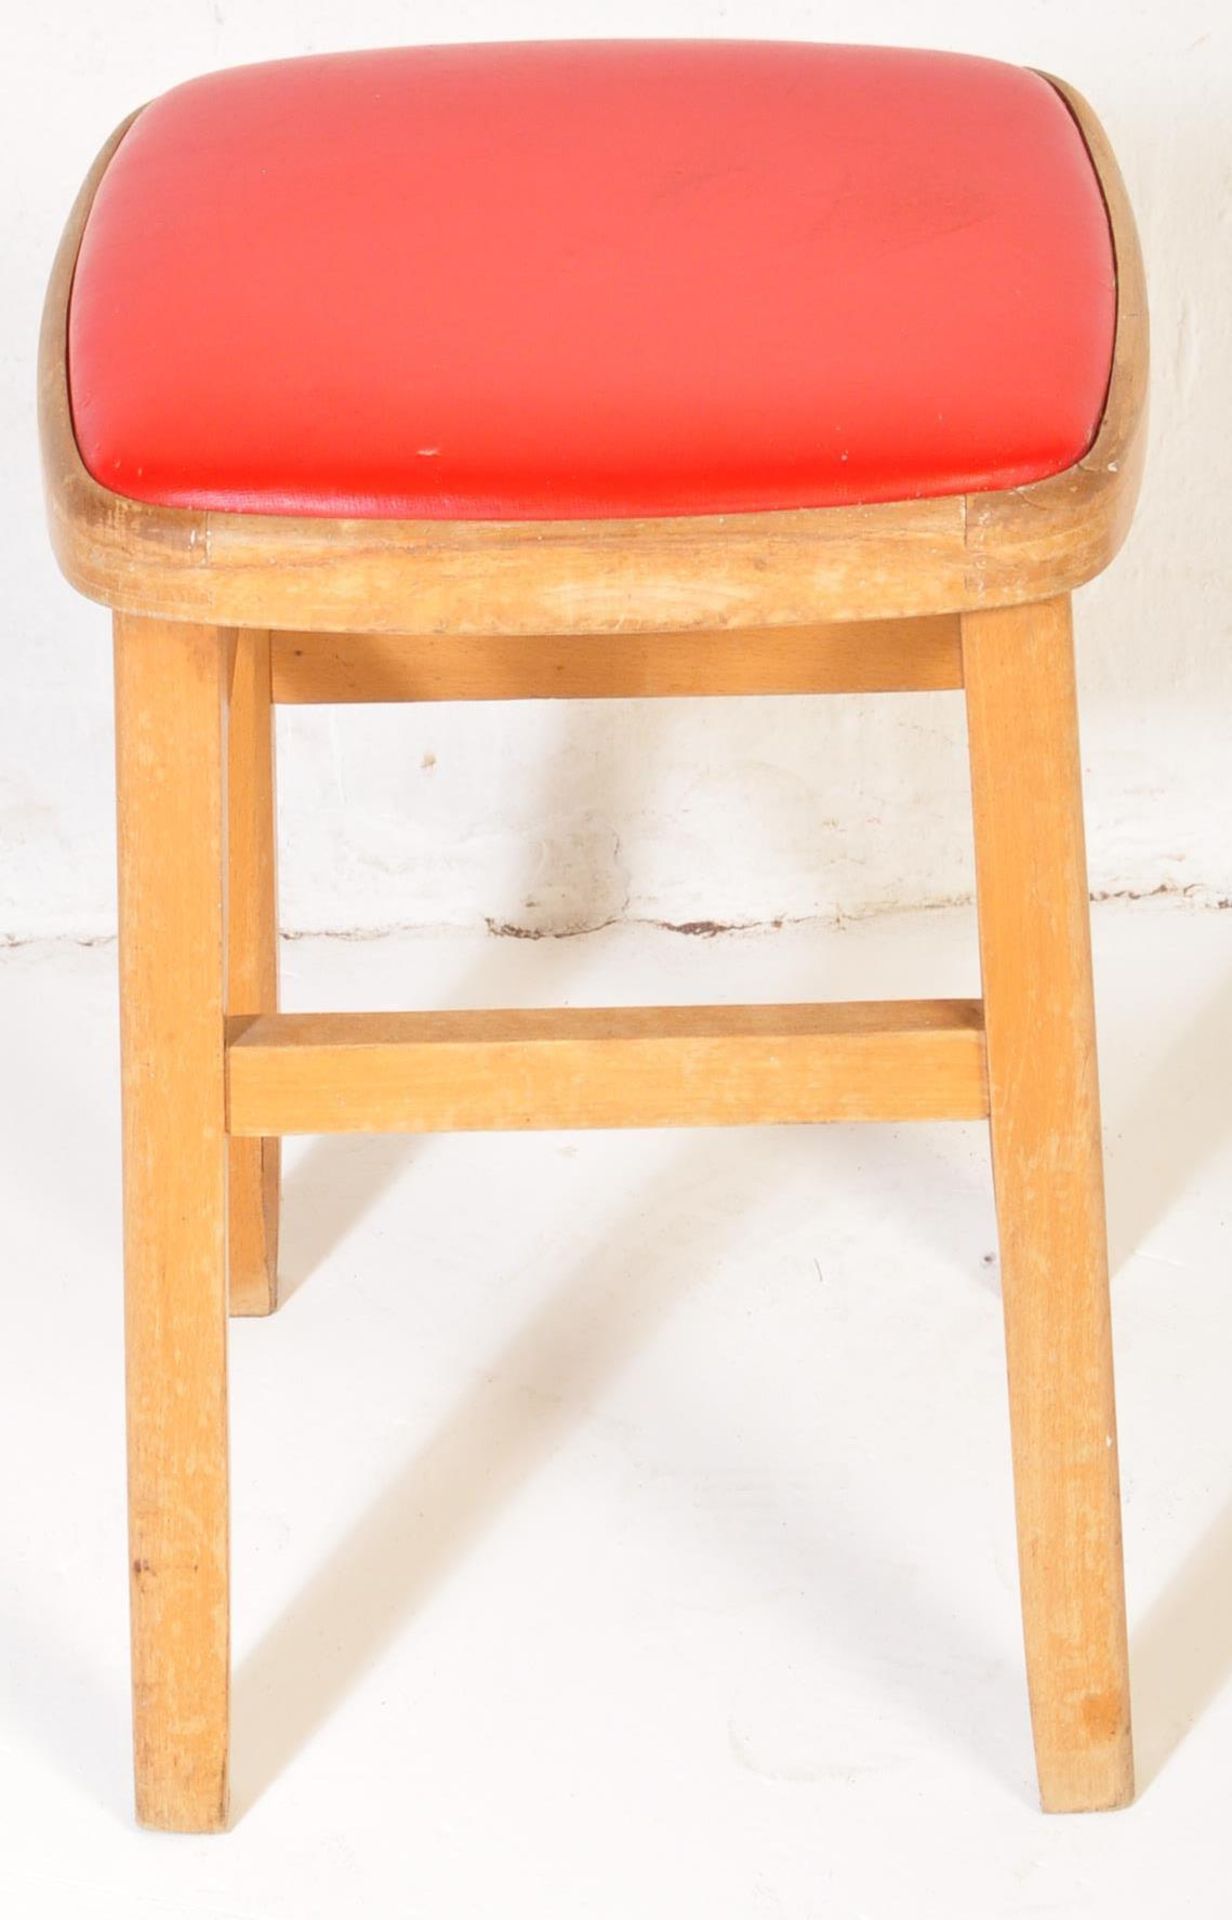 FOUR RETRO MID CENTURY RED LEATHER STOOLS - Image 4 of 5